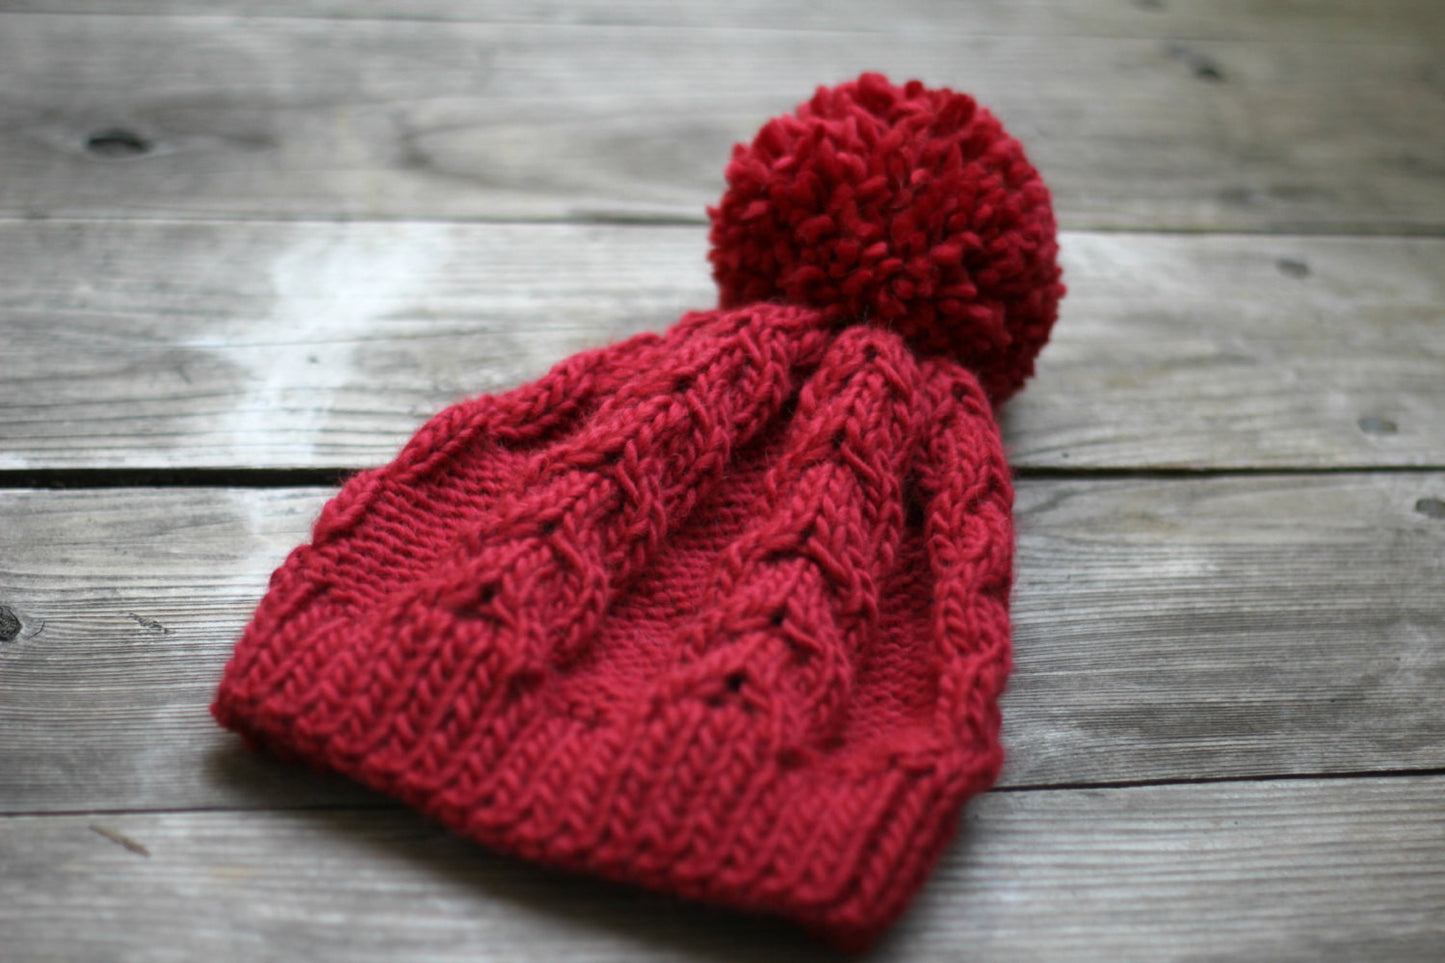 Knit red hat for women